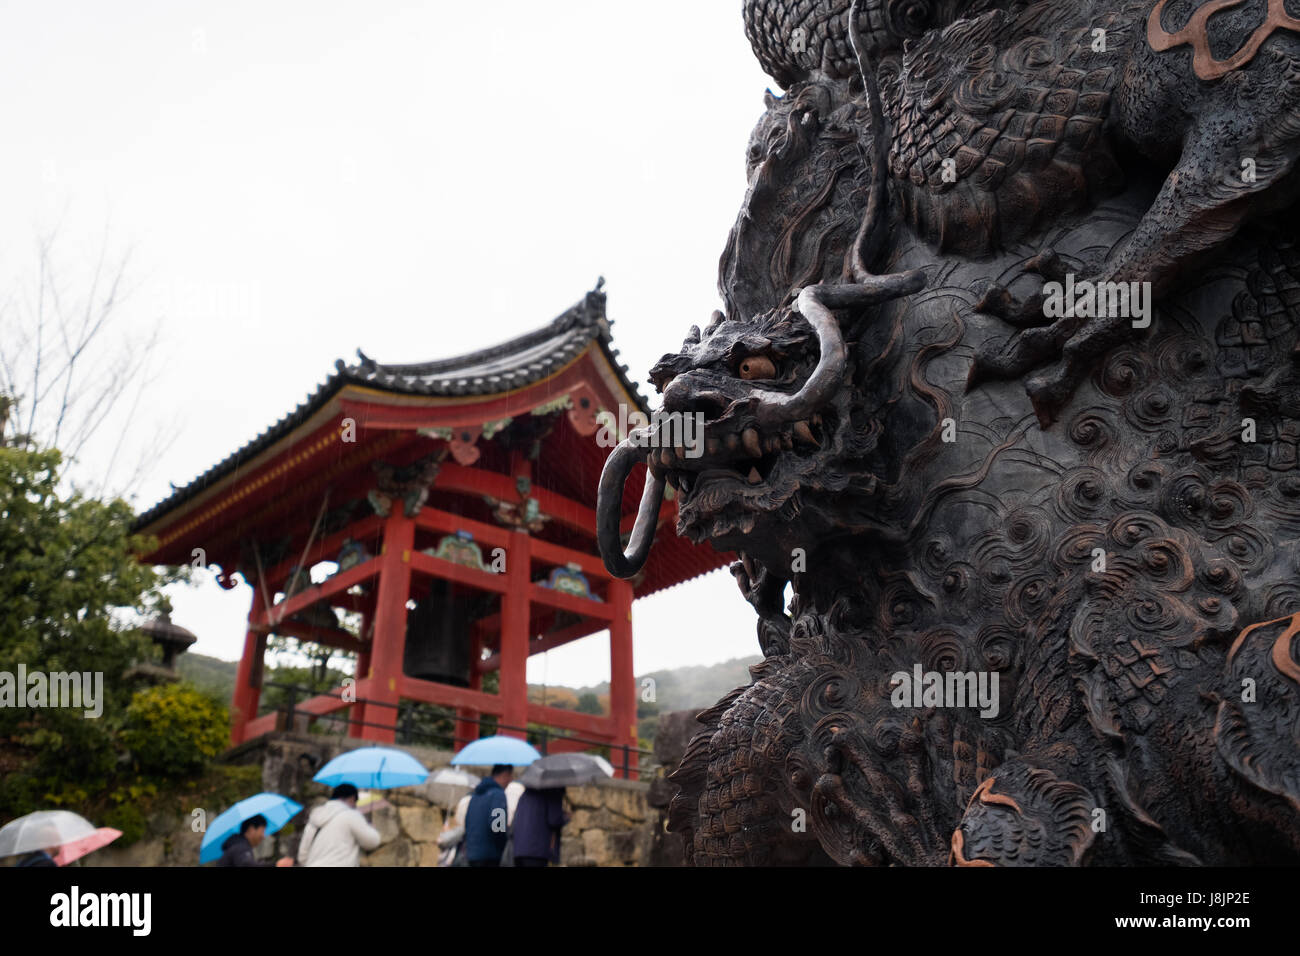 Traditional Japanese dragon statue in Kyoto, Japan. Stock Photo